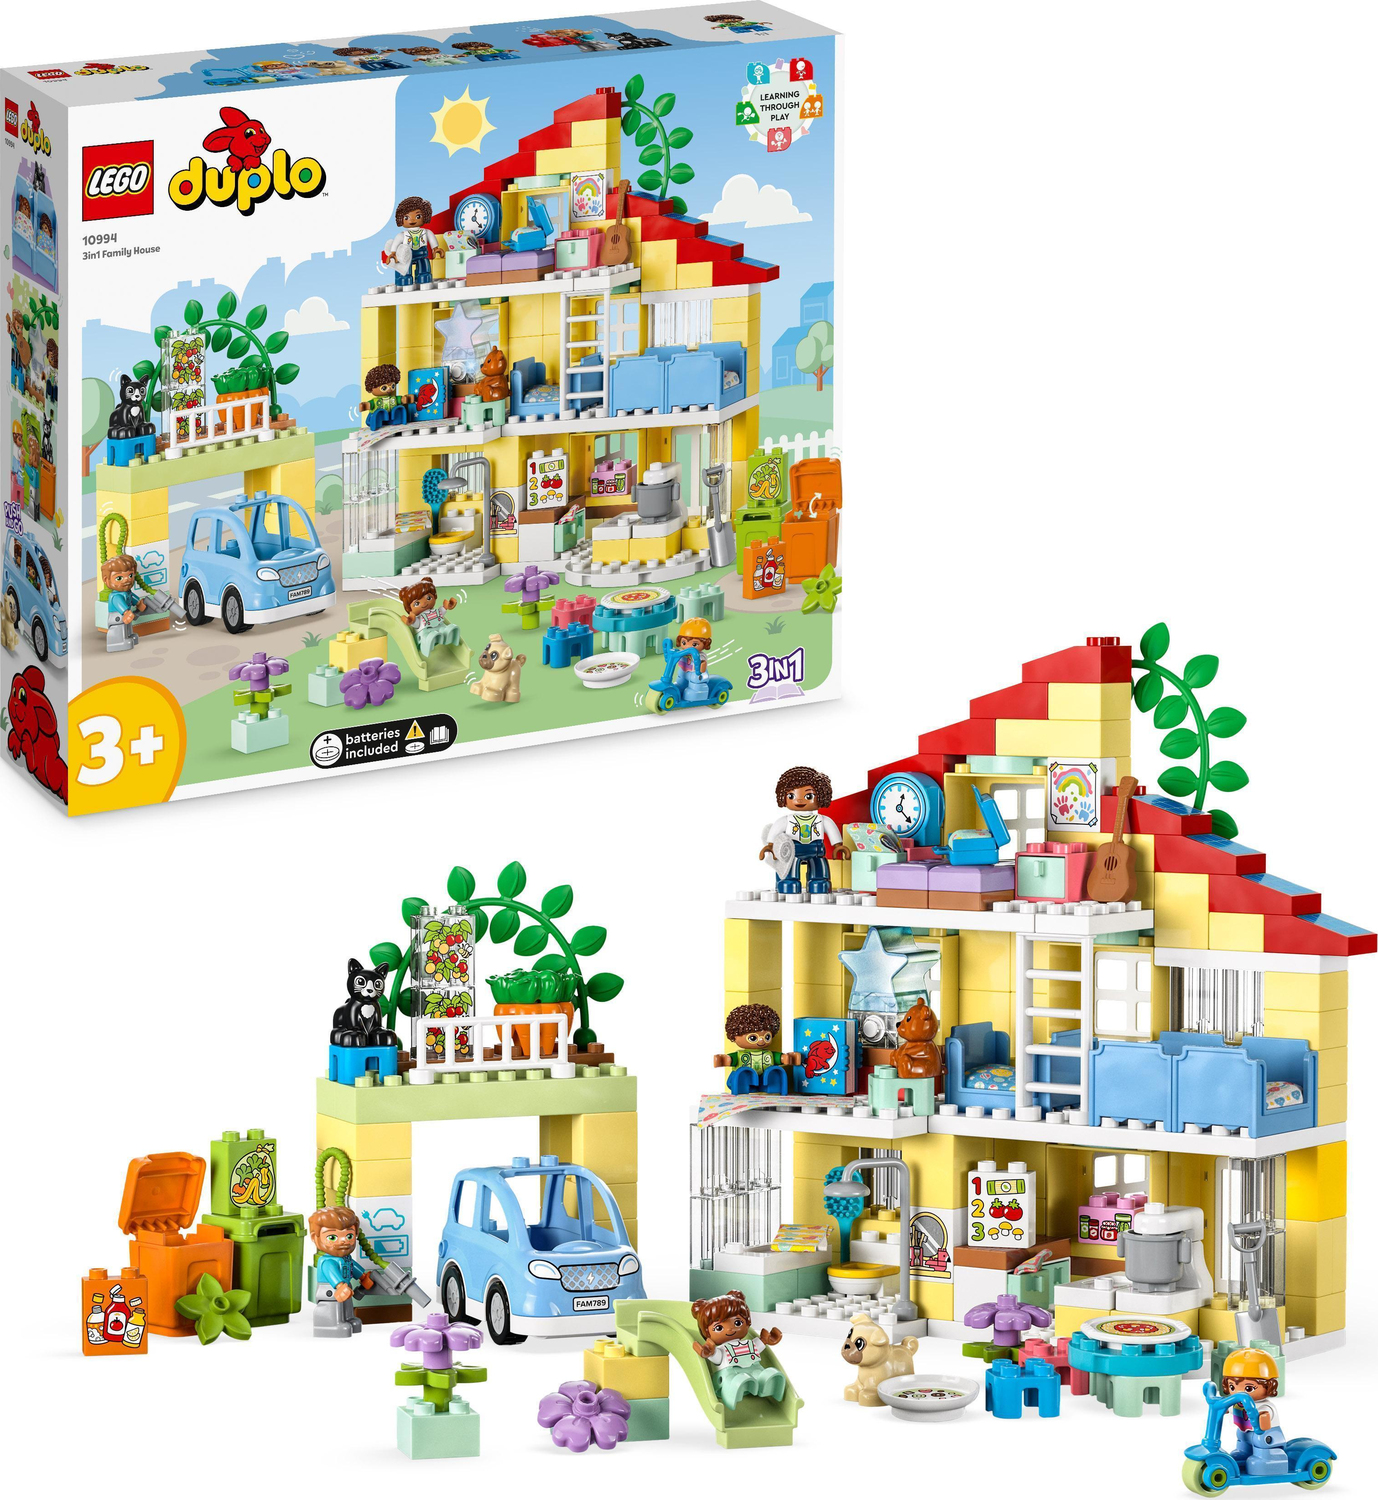 LEGO DUPLO 3 in 1 Family House Set with Toy Car - Imagination